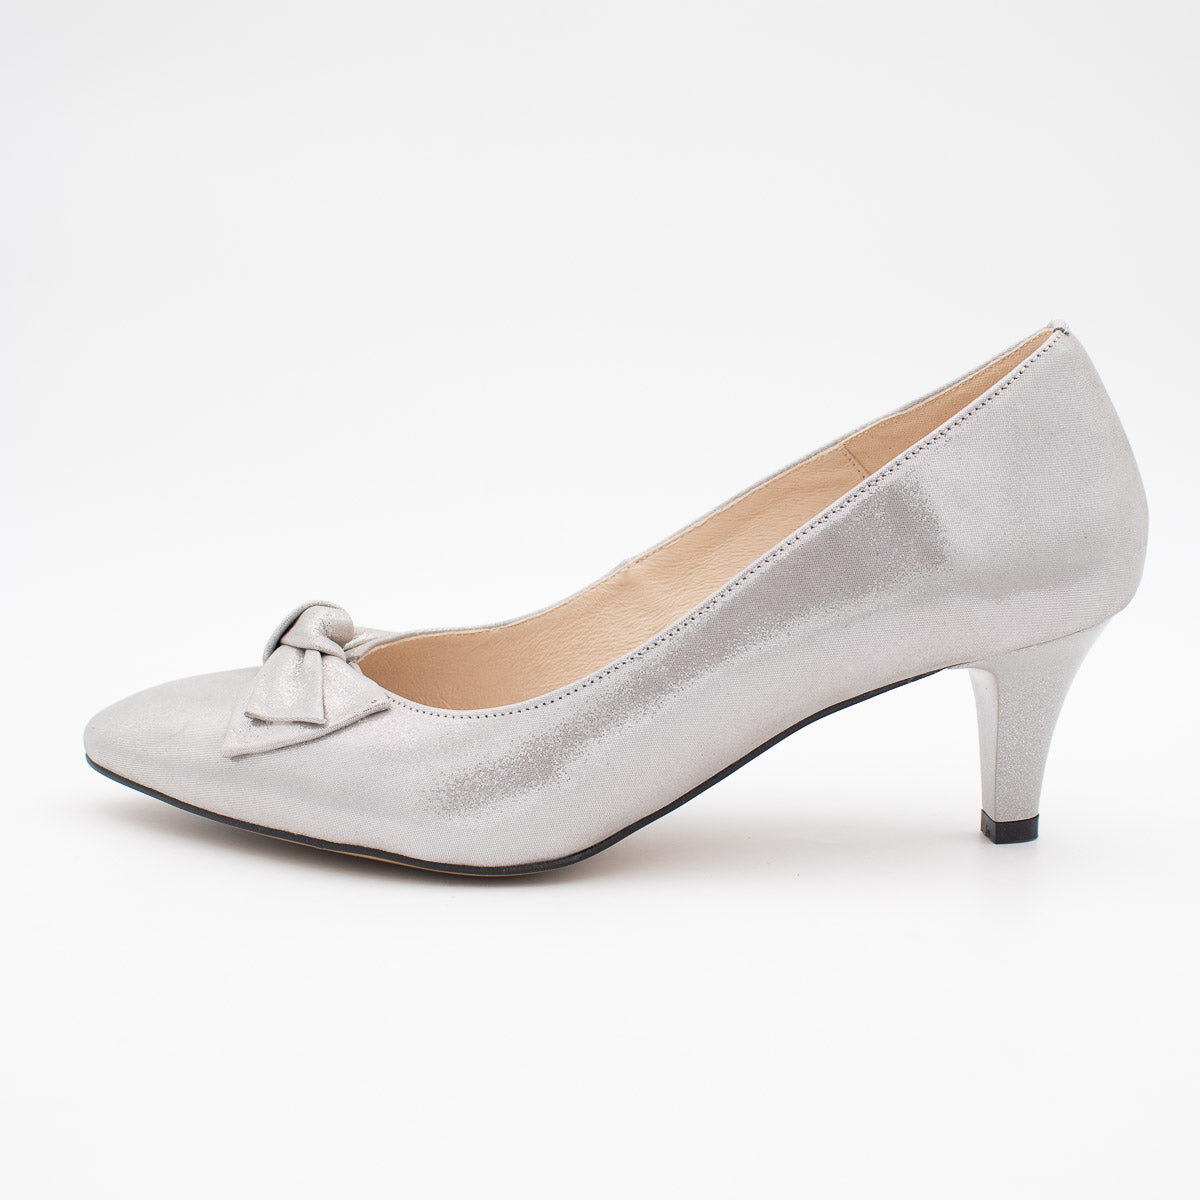 Silver Metallic Low Heel High Heels with Pretty Bow Detail